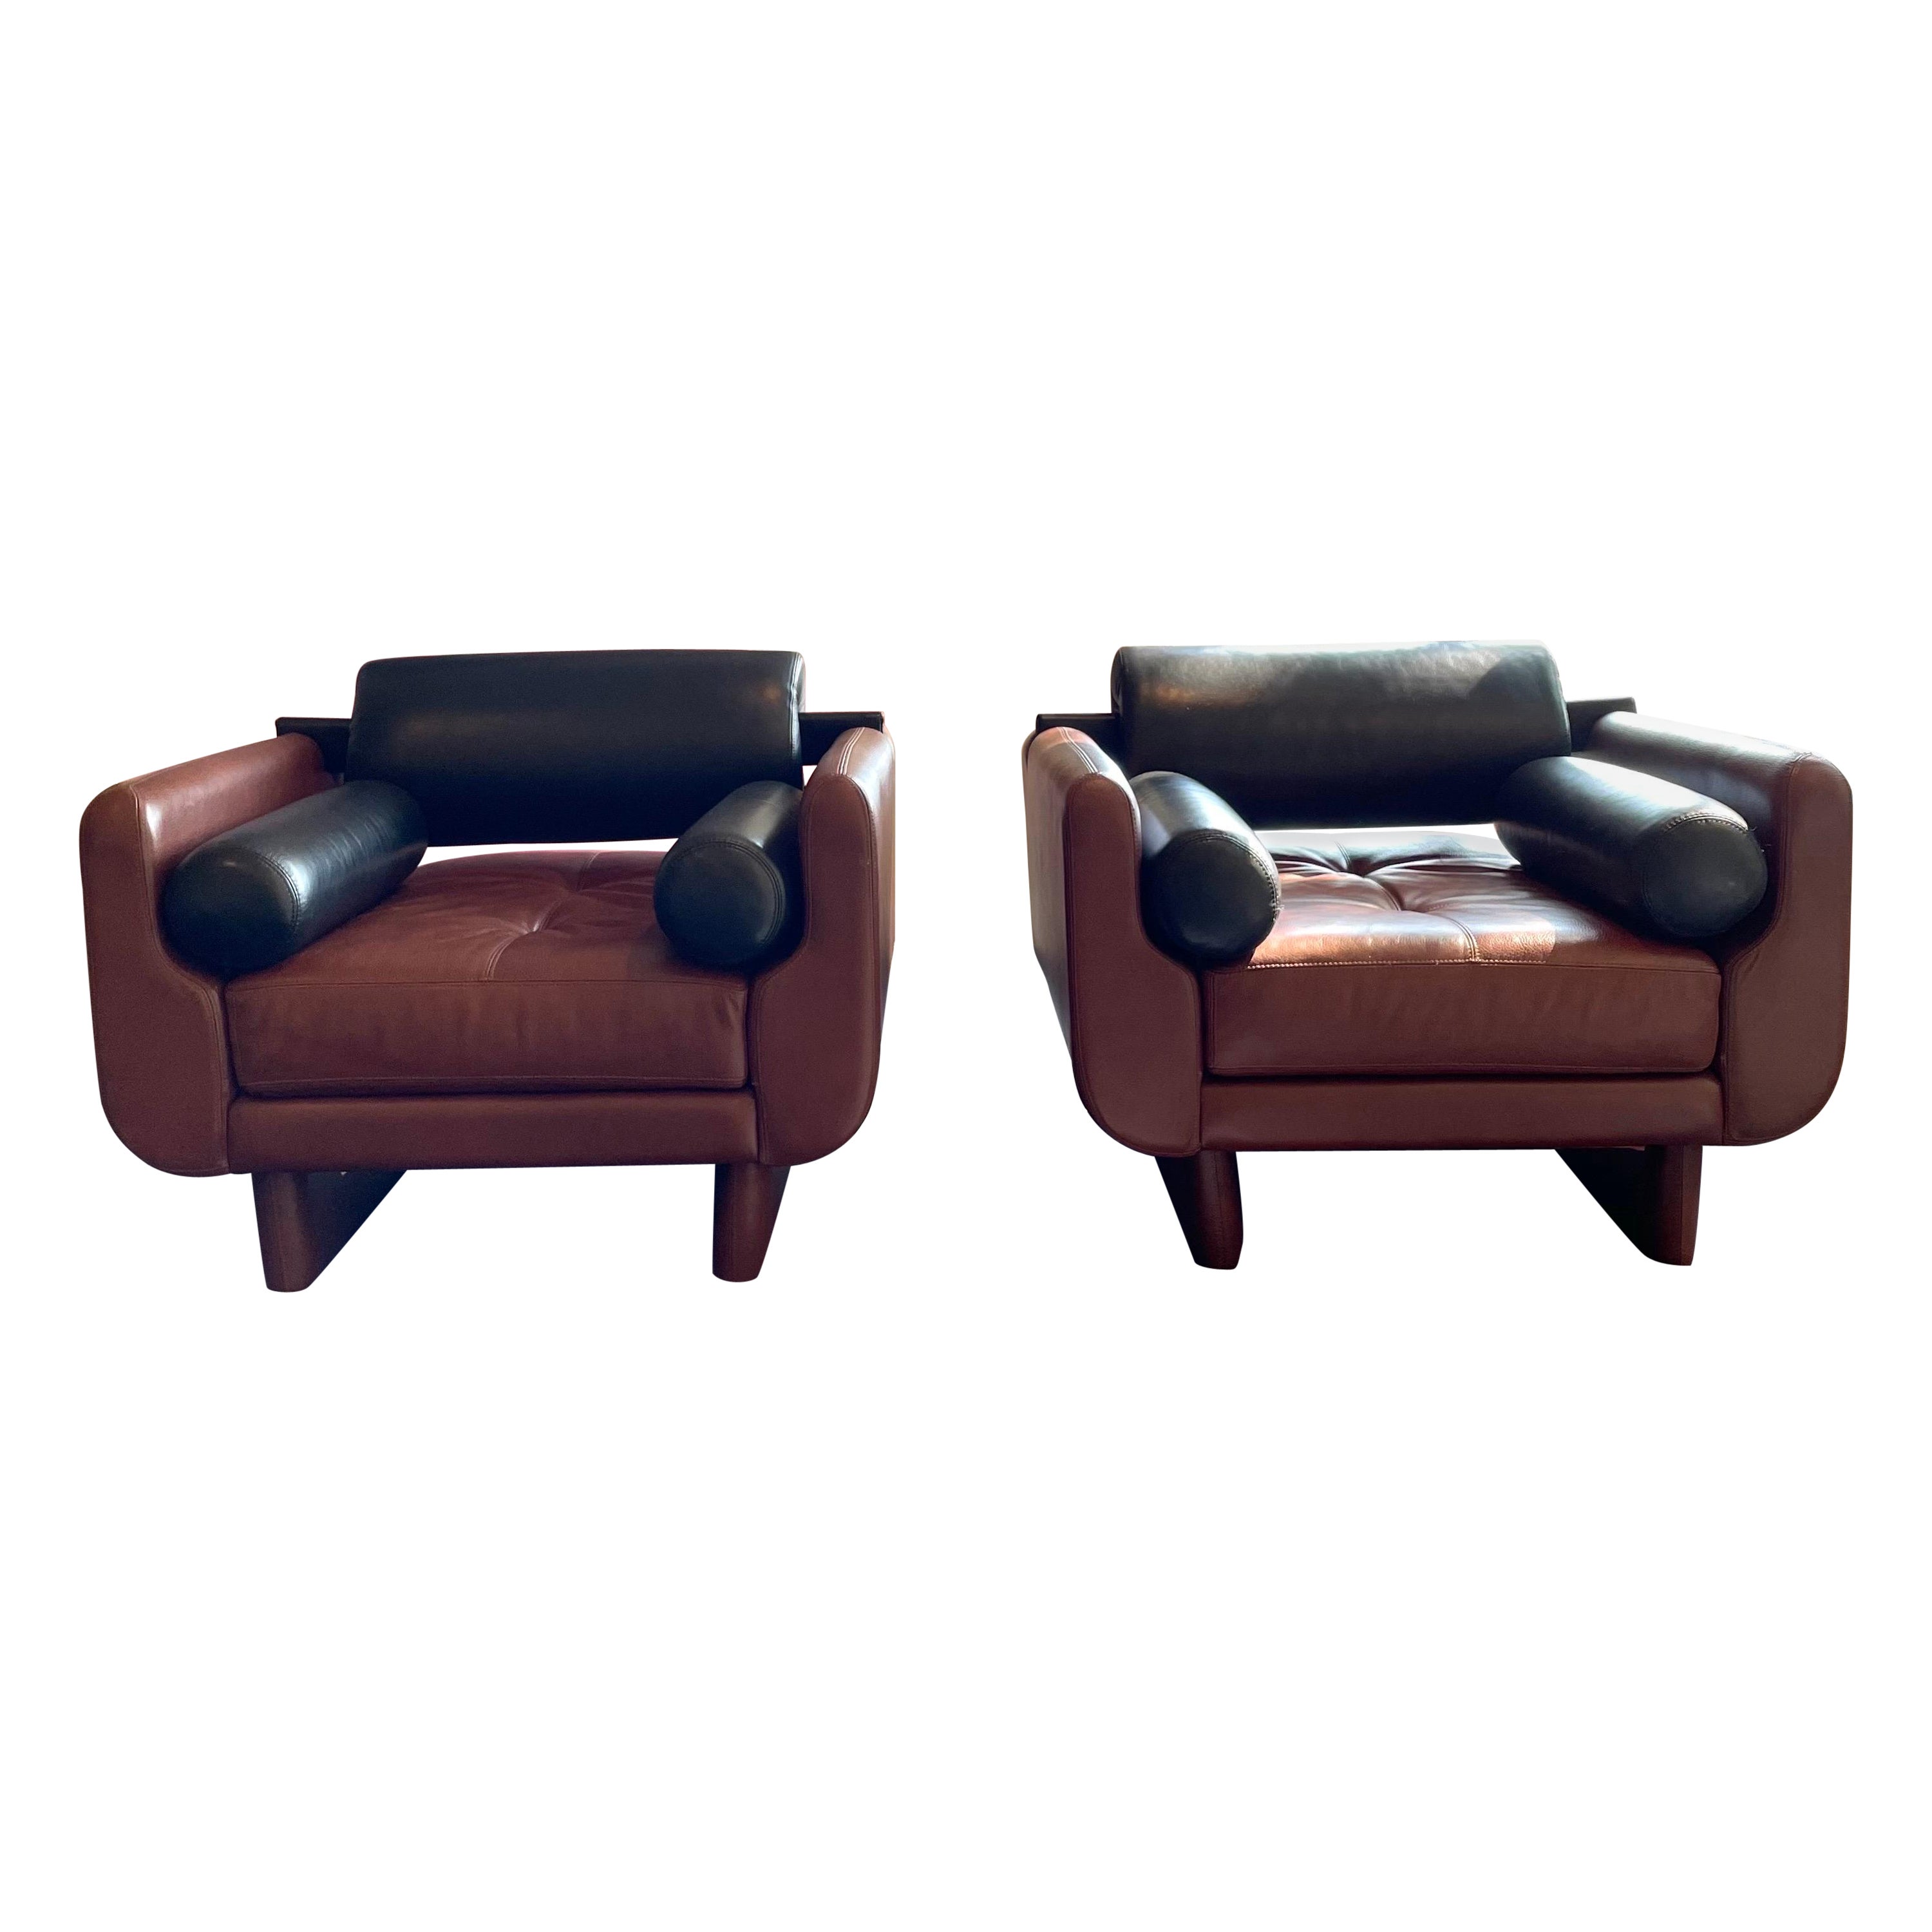 Vladimir Kagan "Matinee" Chairs for American Leather- a pair For Sale